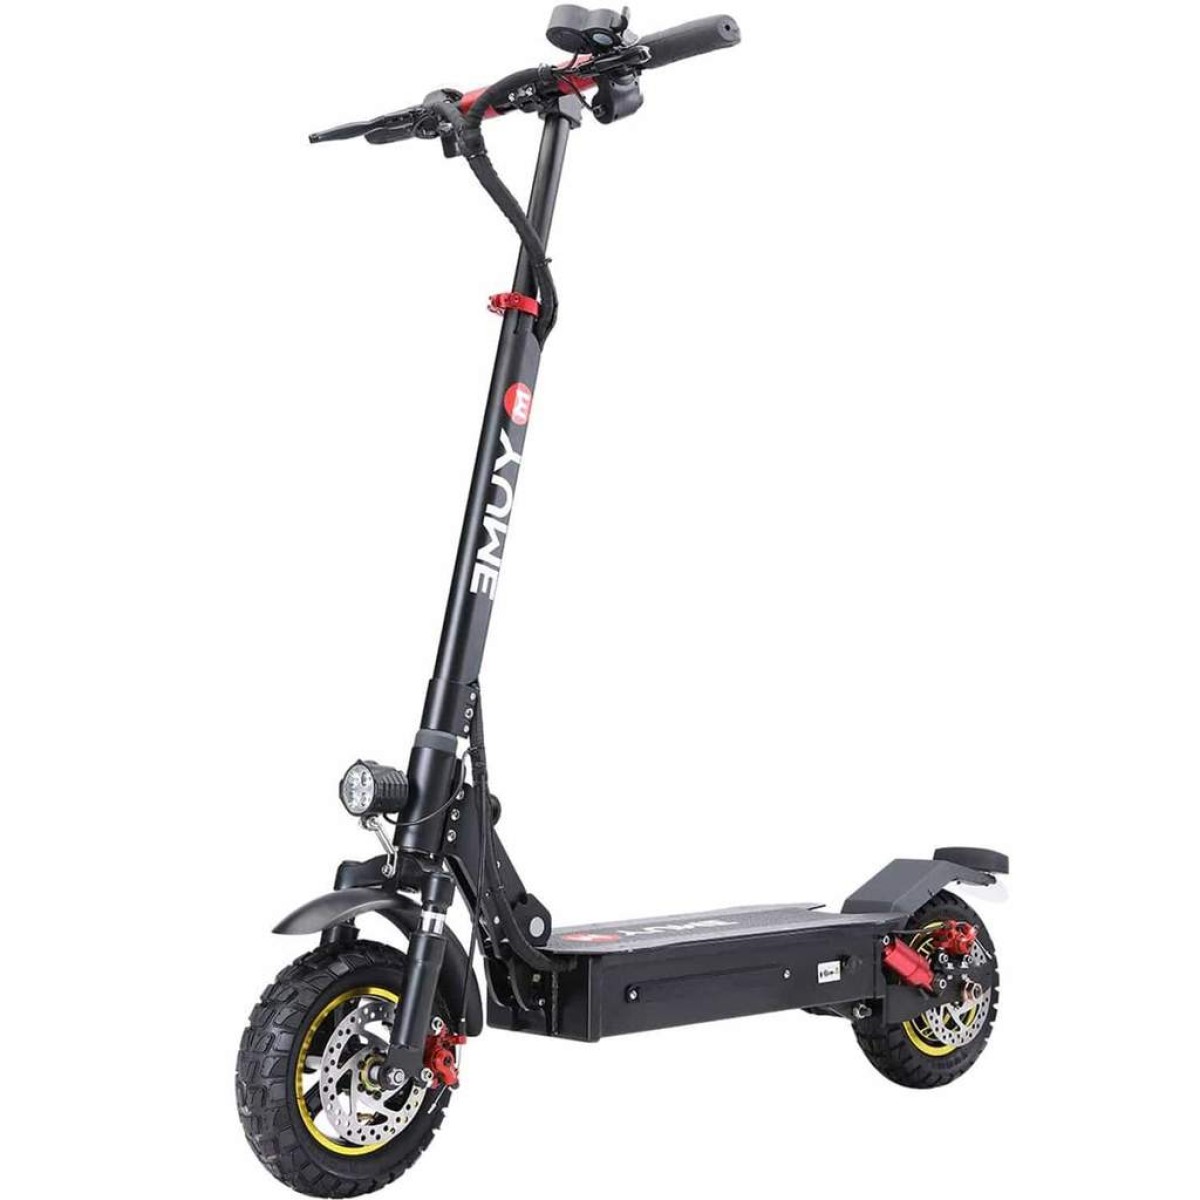 Yume YM10S 48V 100W off road folding electric scooter 10 inch 45km/h top speed 45-50km mileage range max load 120kg